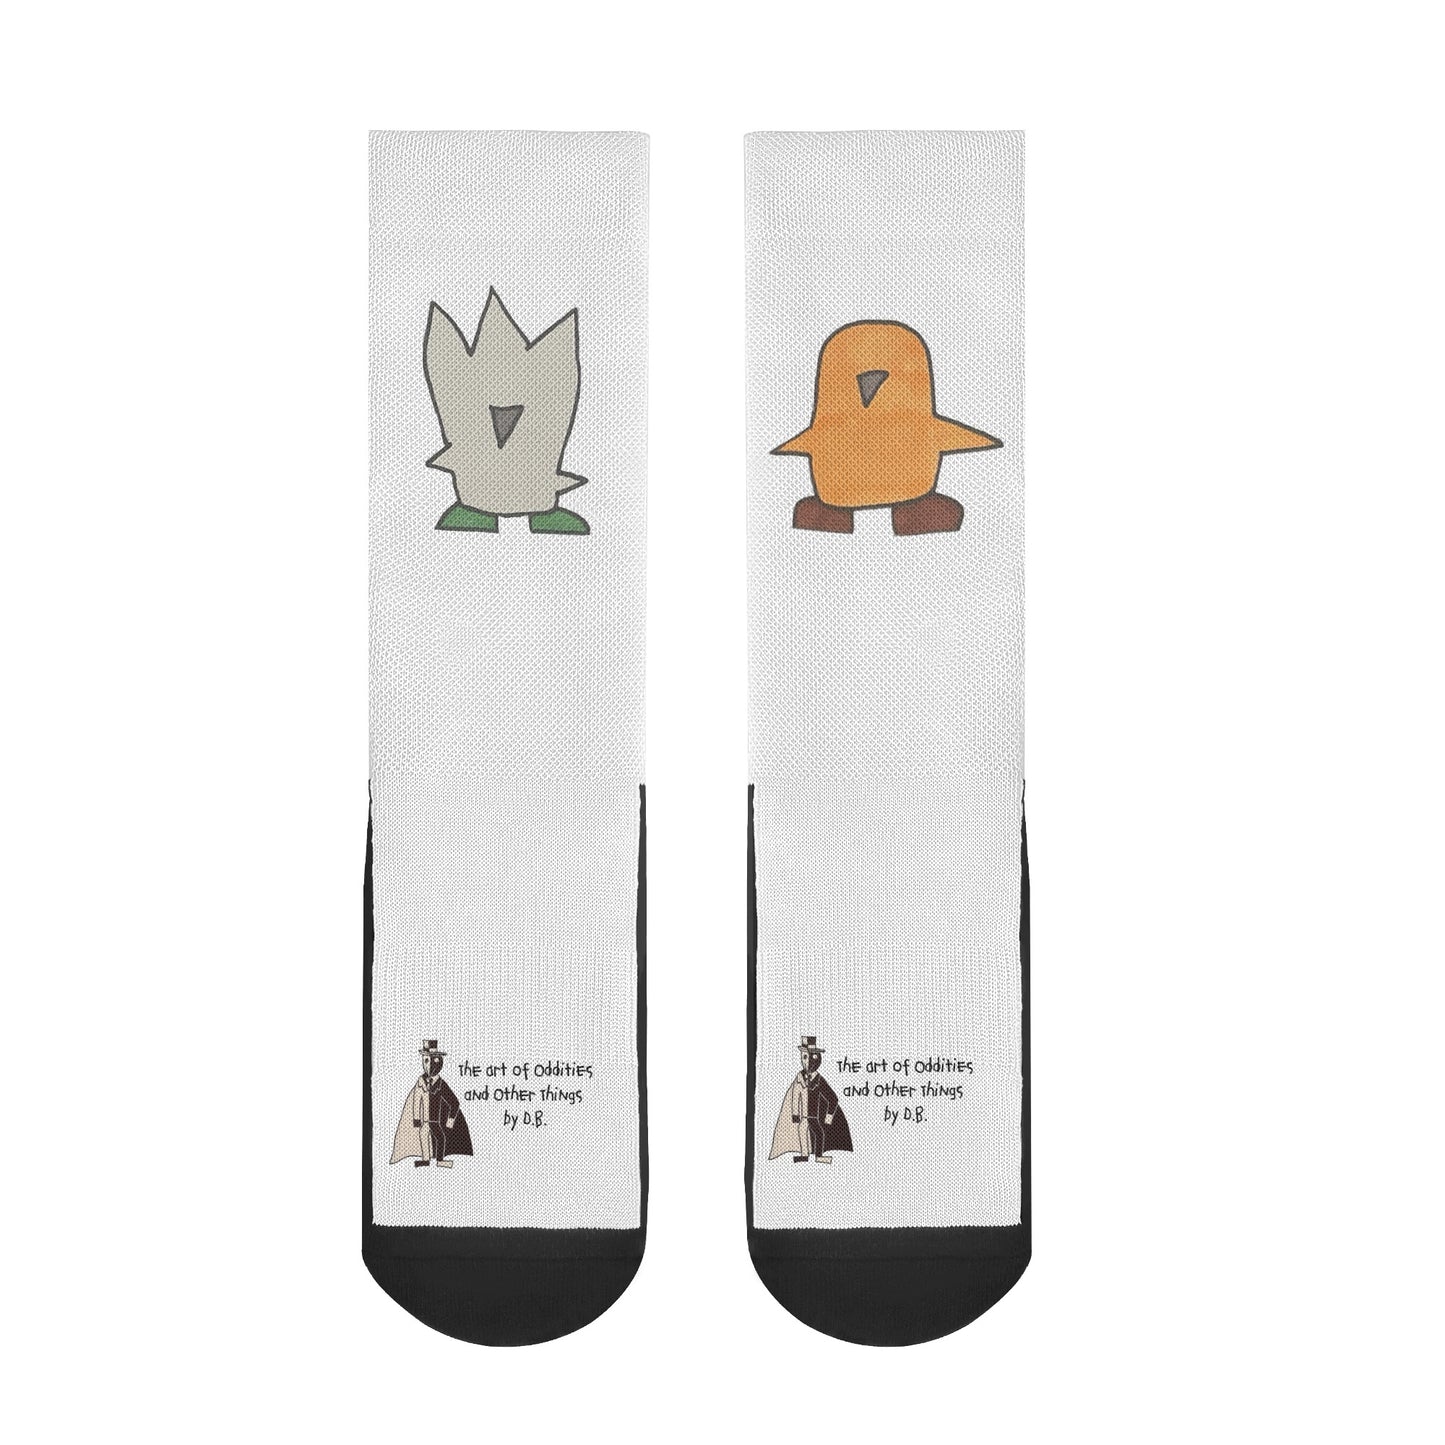 Fuzzy and Muffin by D.B. Wearable Art Comfy Funky Socks Sensory Friendly Seamless Toe (White)